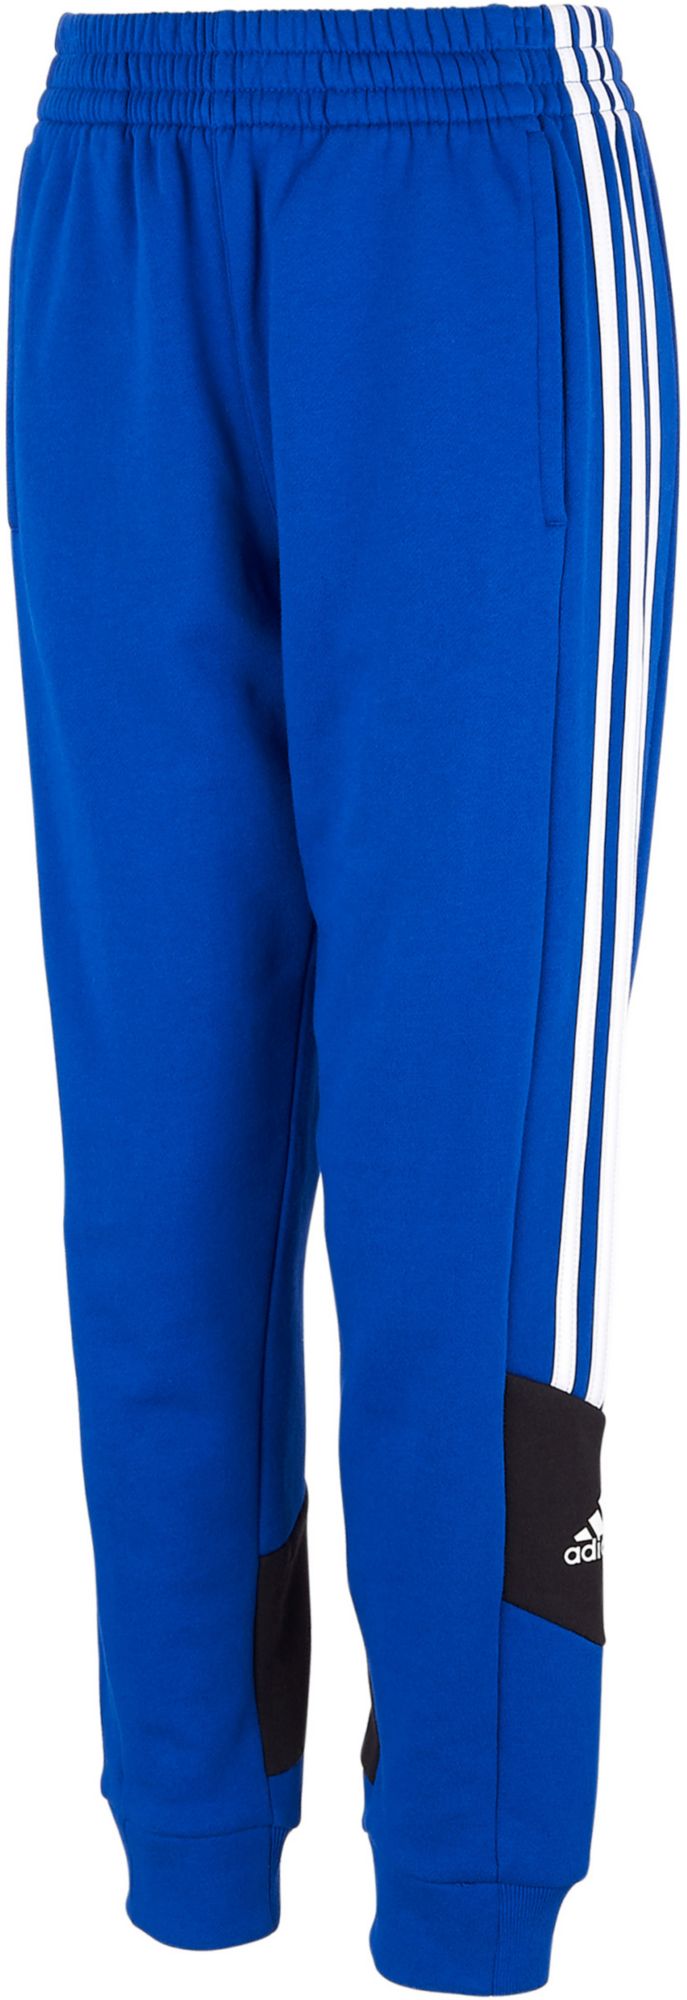 blue and white adidas joggers